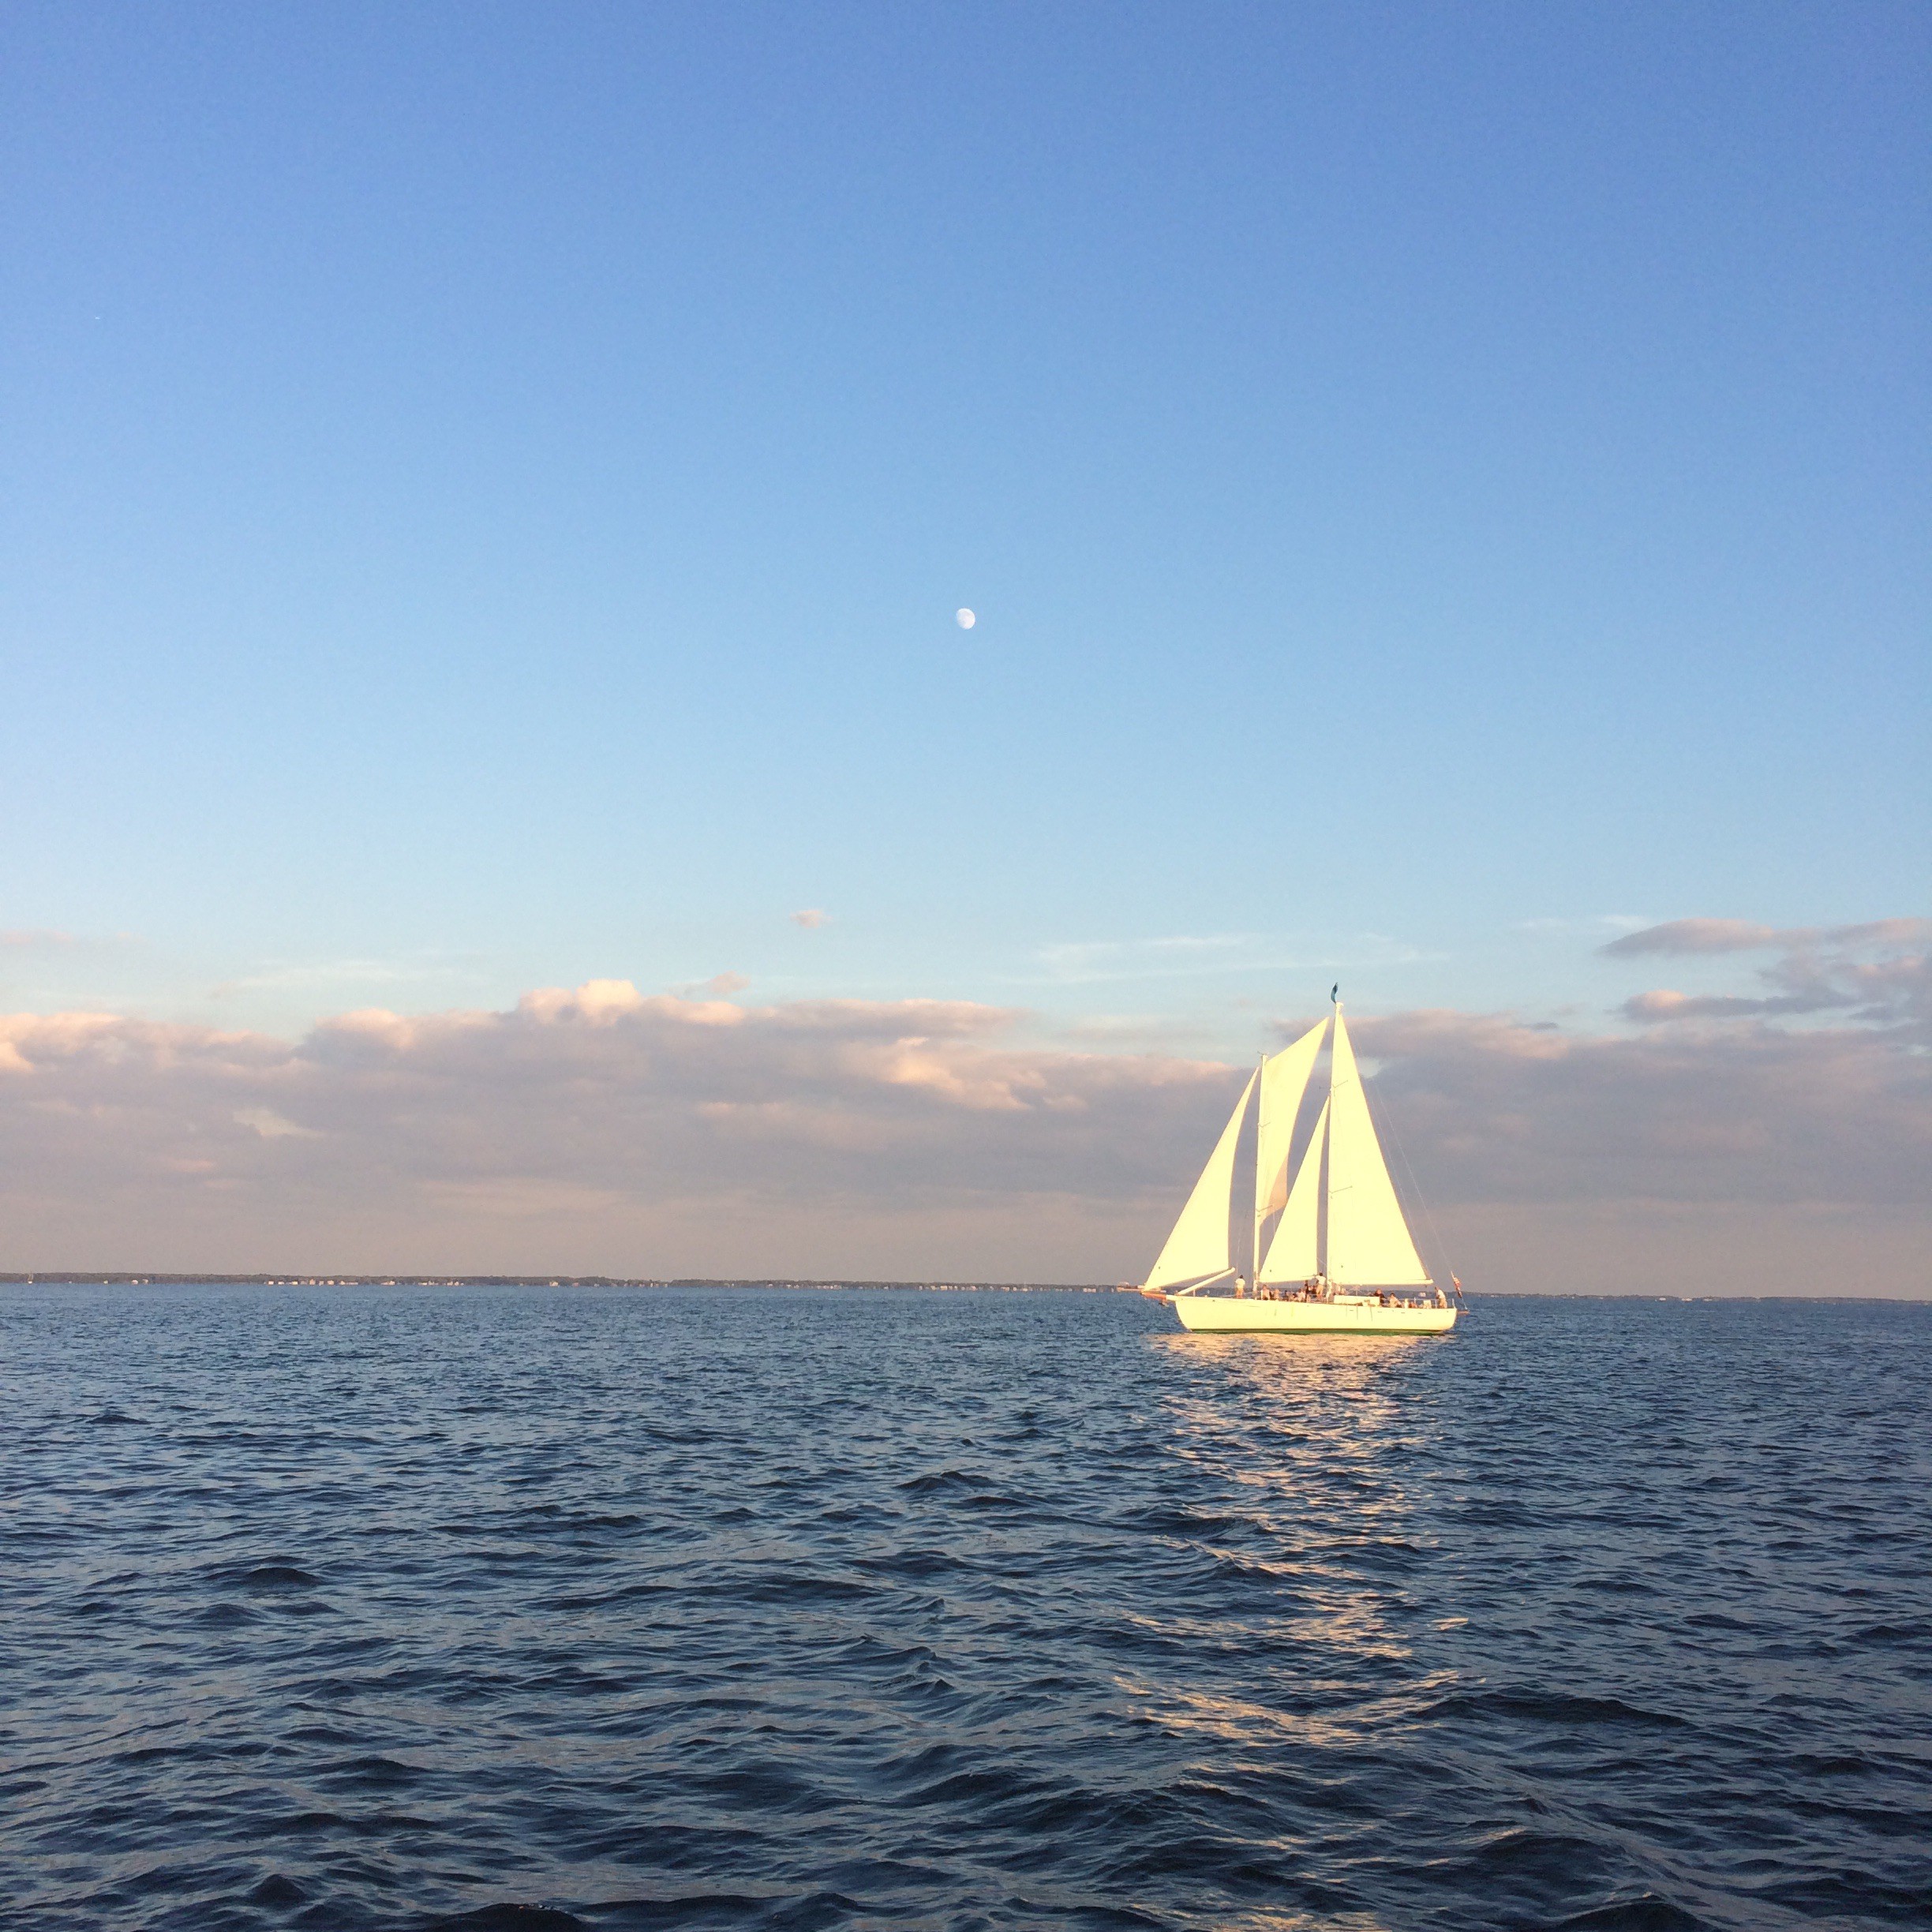 Sun reflecting off of a White Schooner on blue waters against a blue sky